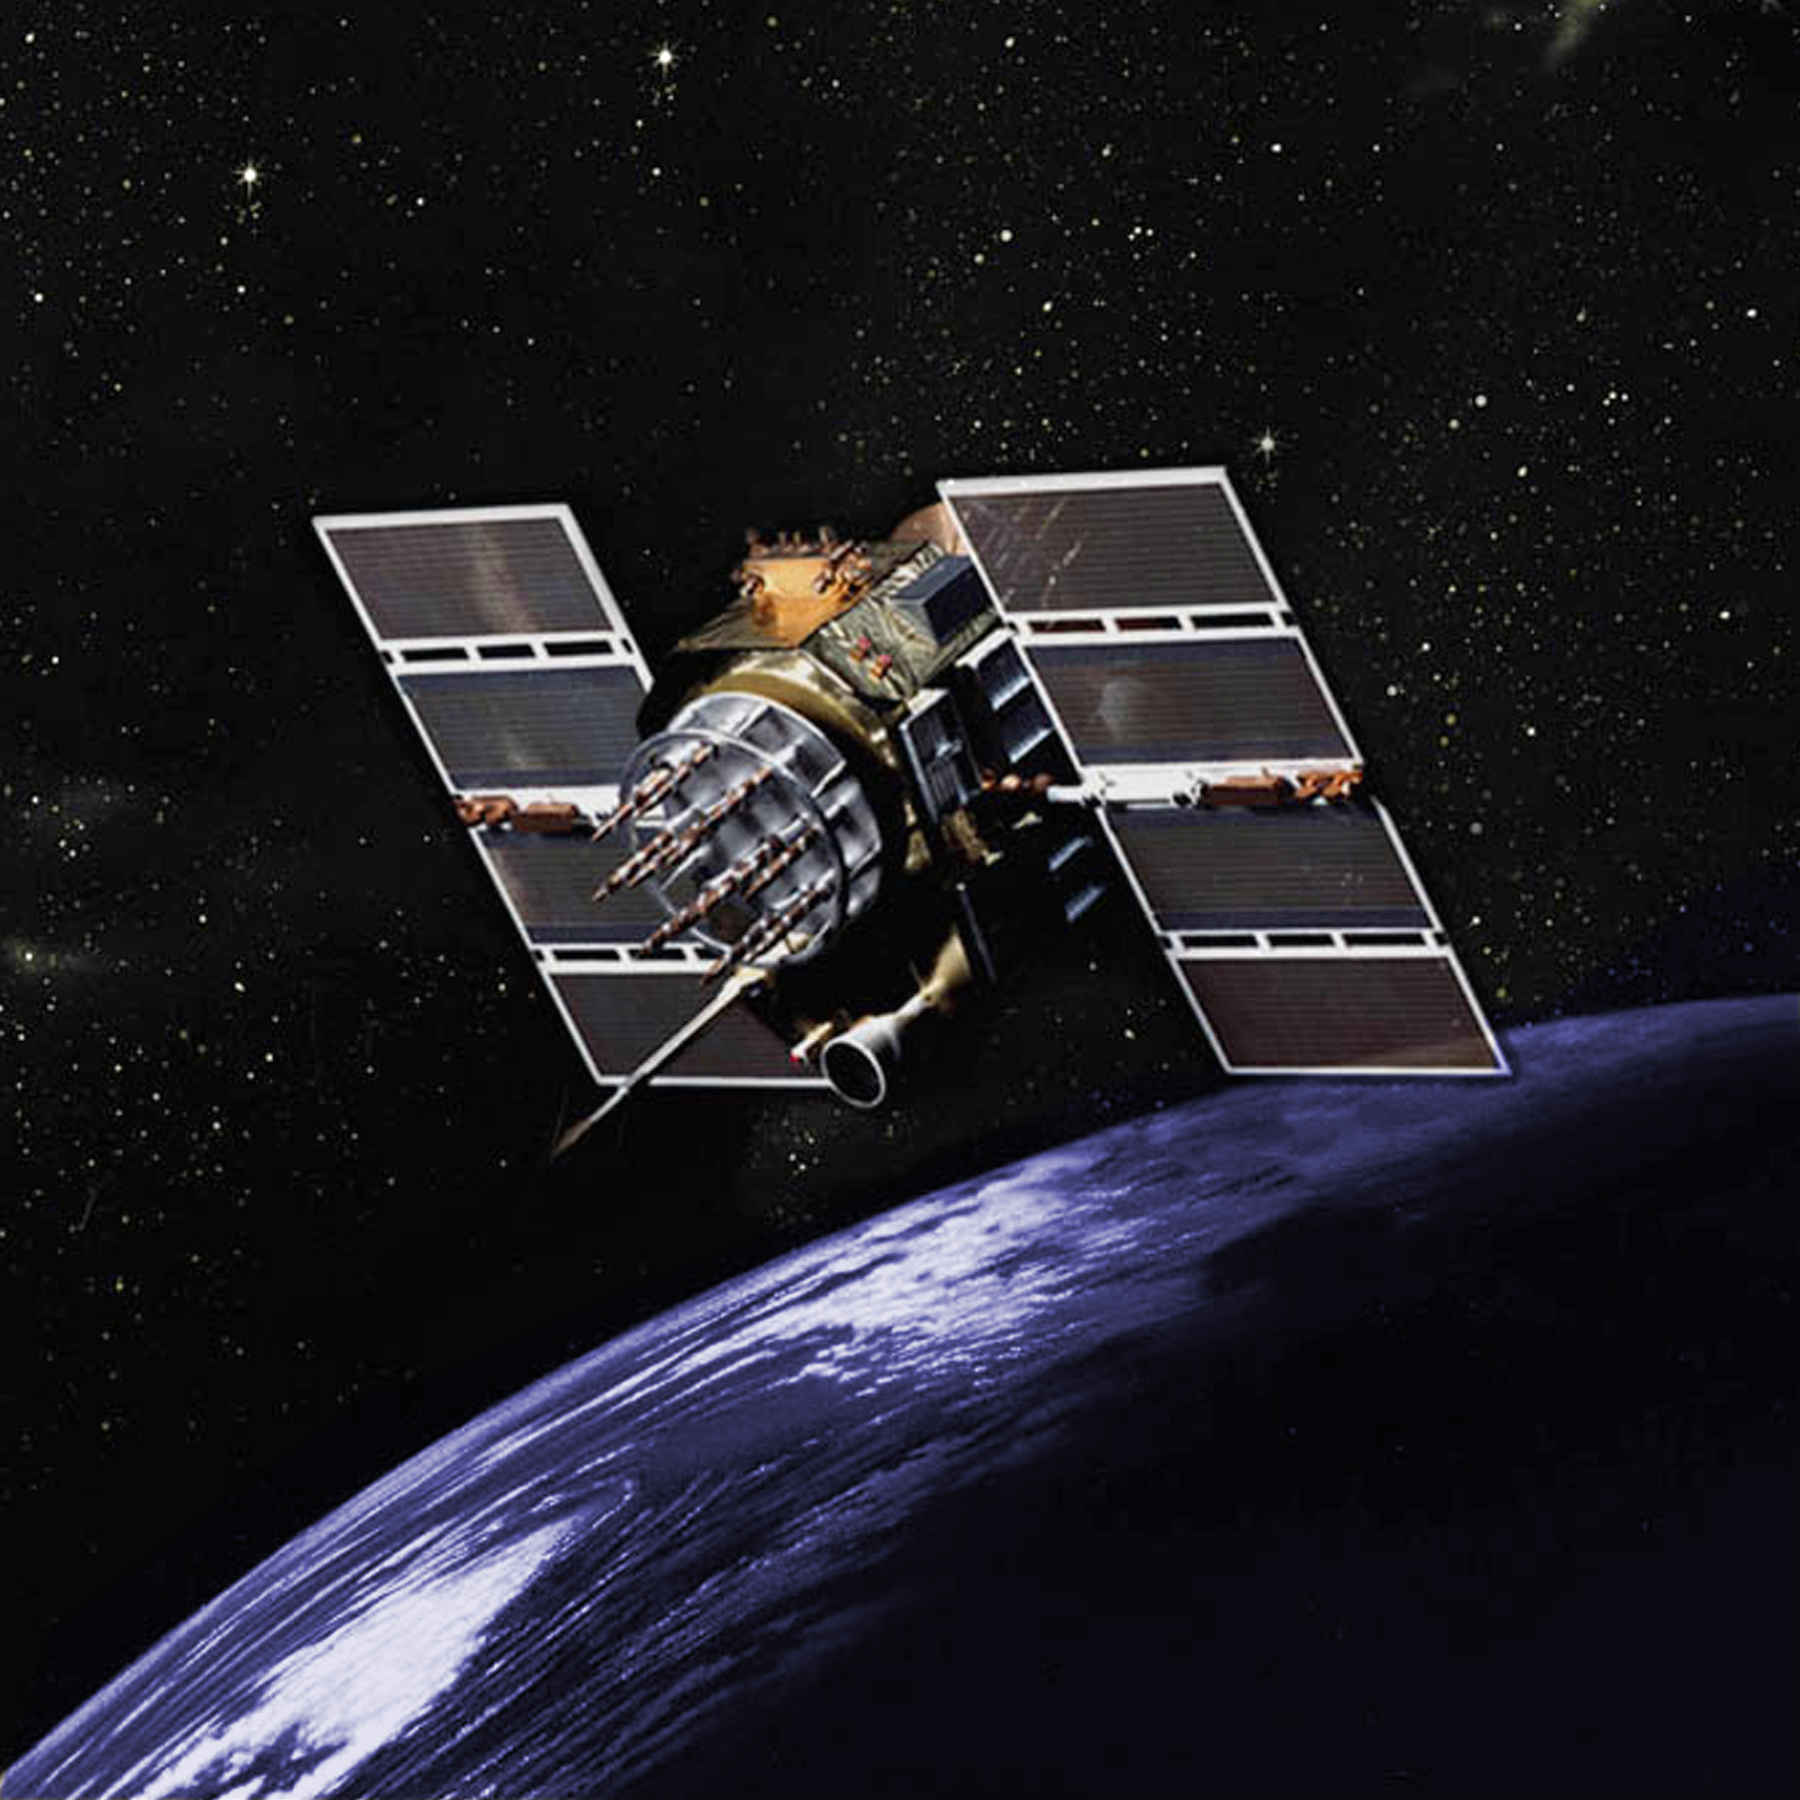 A GPS satellite, Credit: United States Government